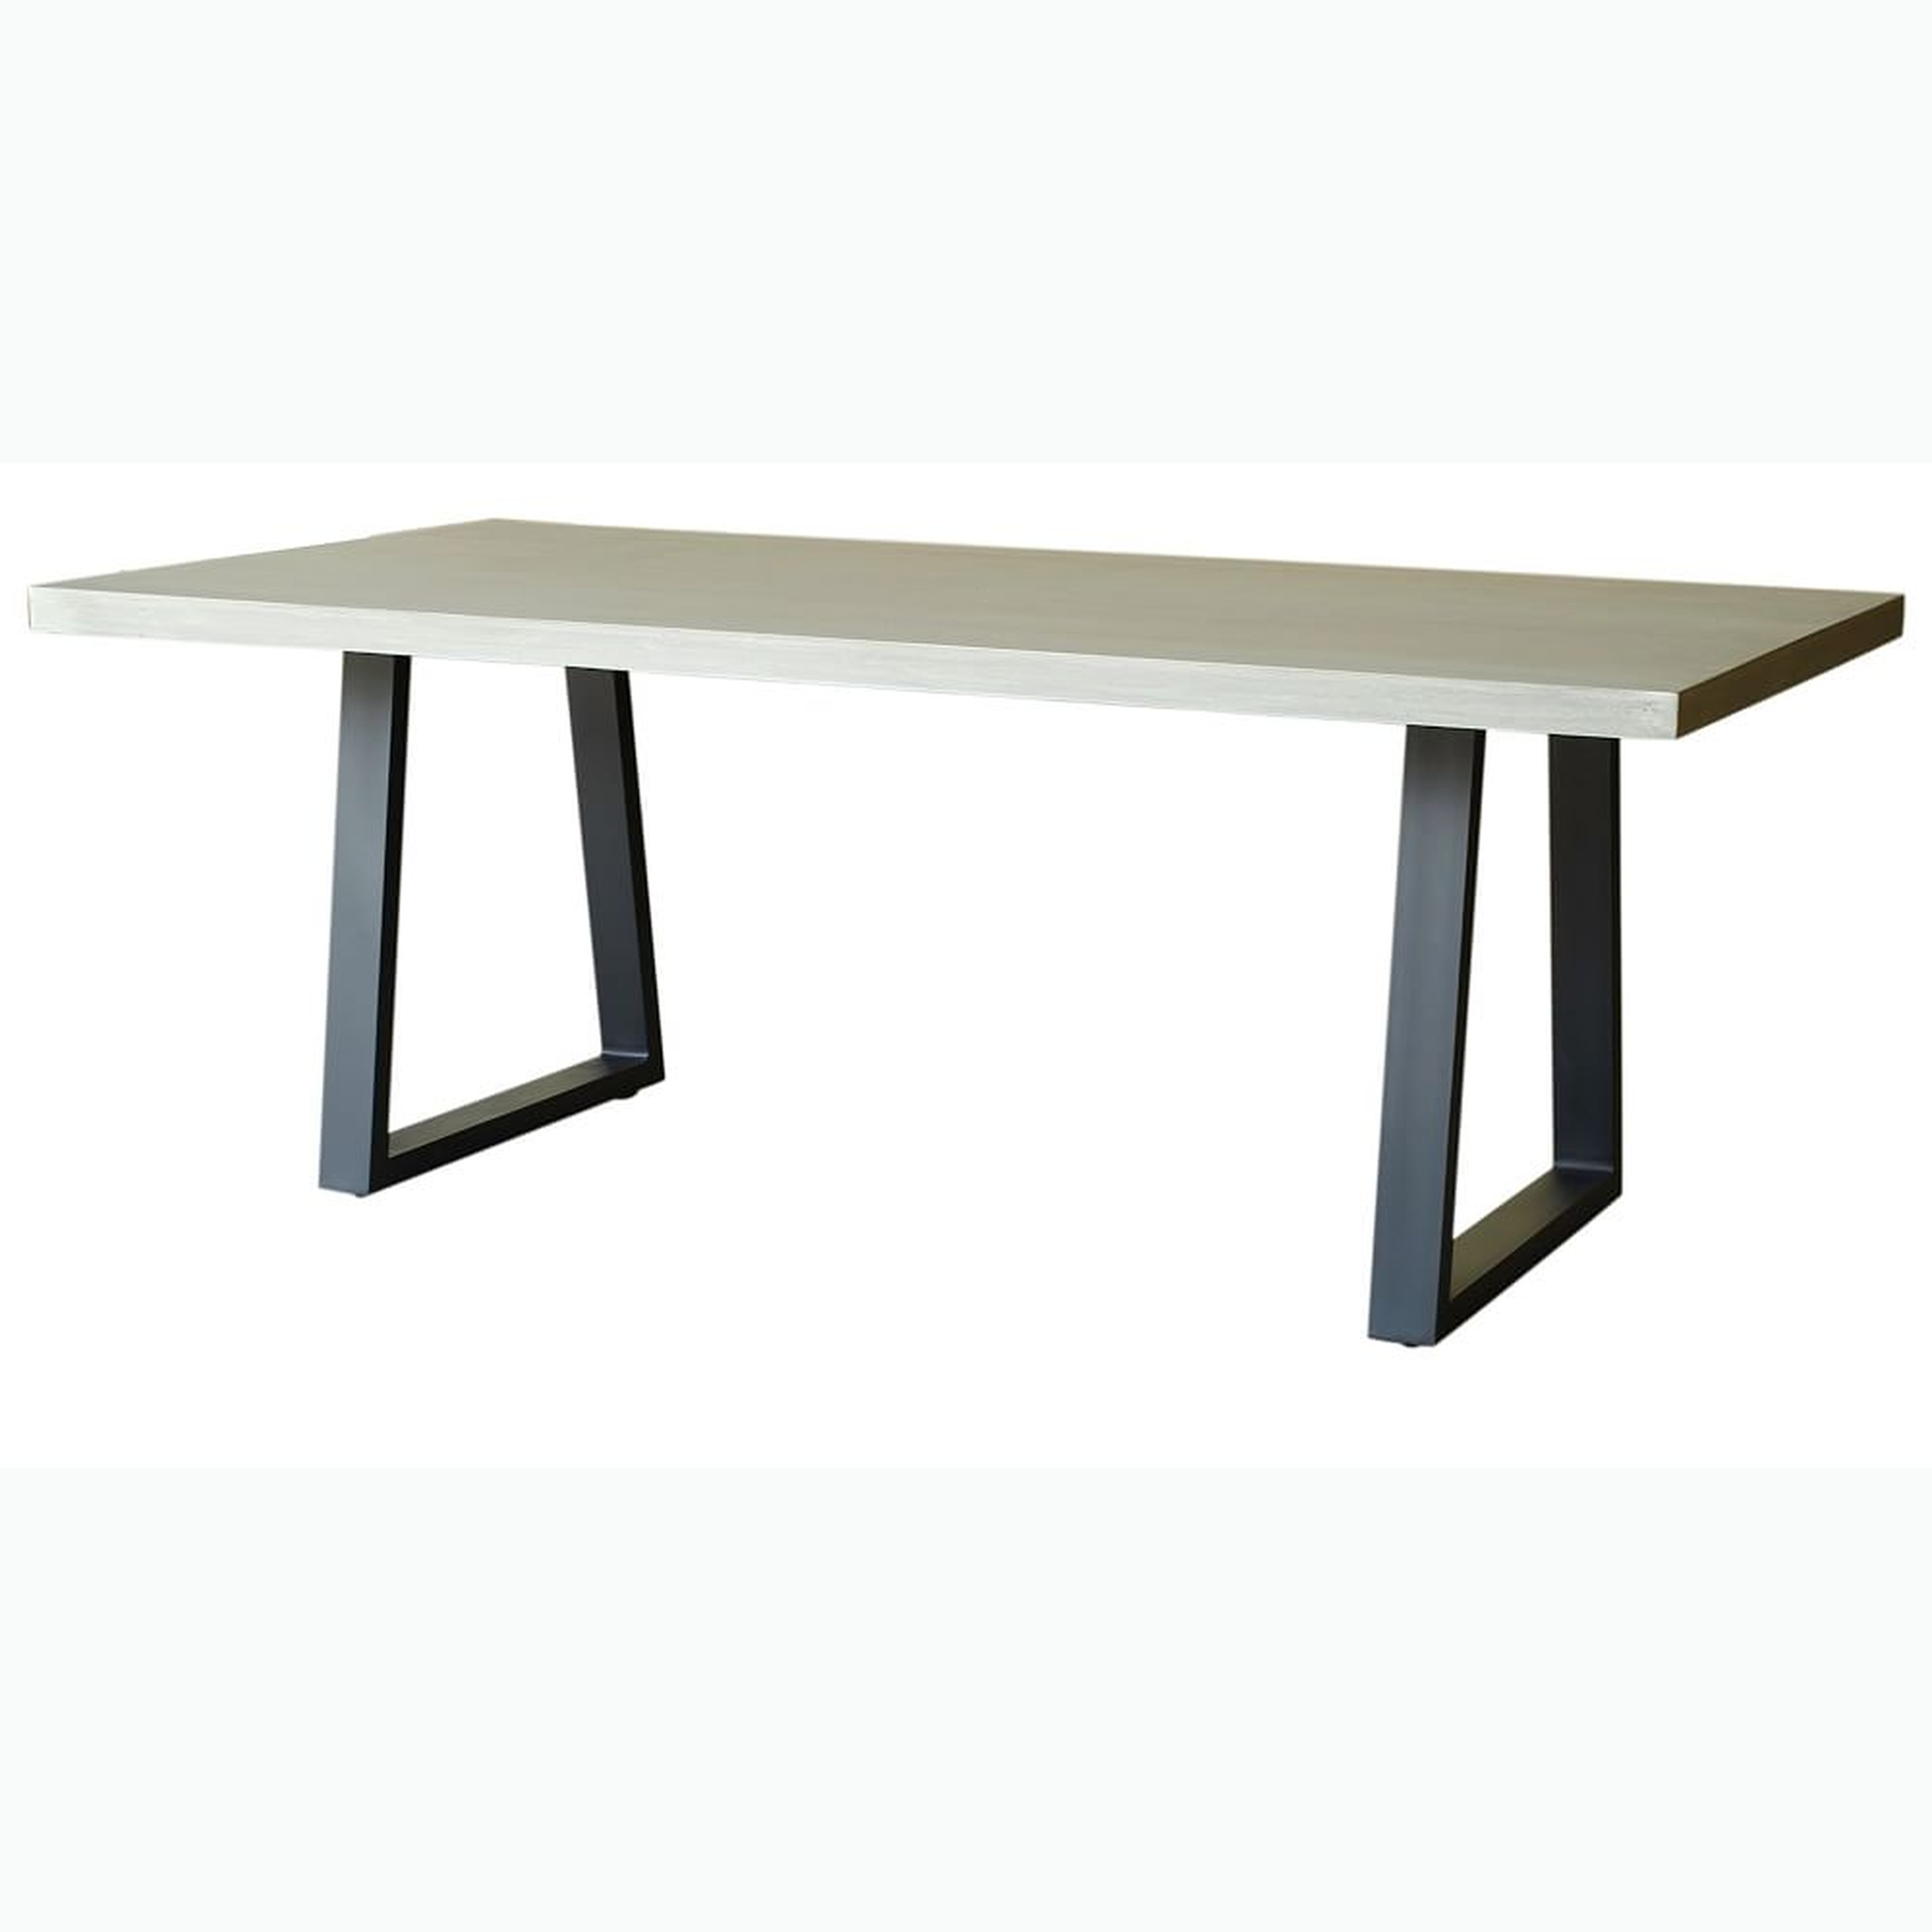 Malfa 78.75" Outdoor Rectangle Dining Table, Light Grey - West Elm